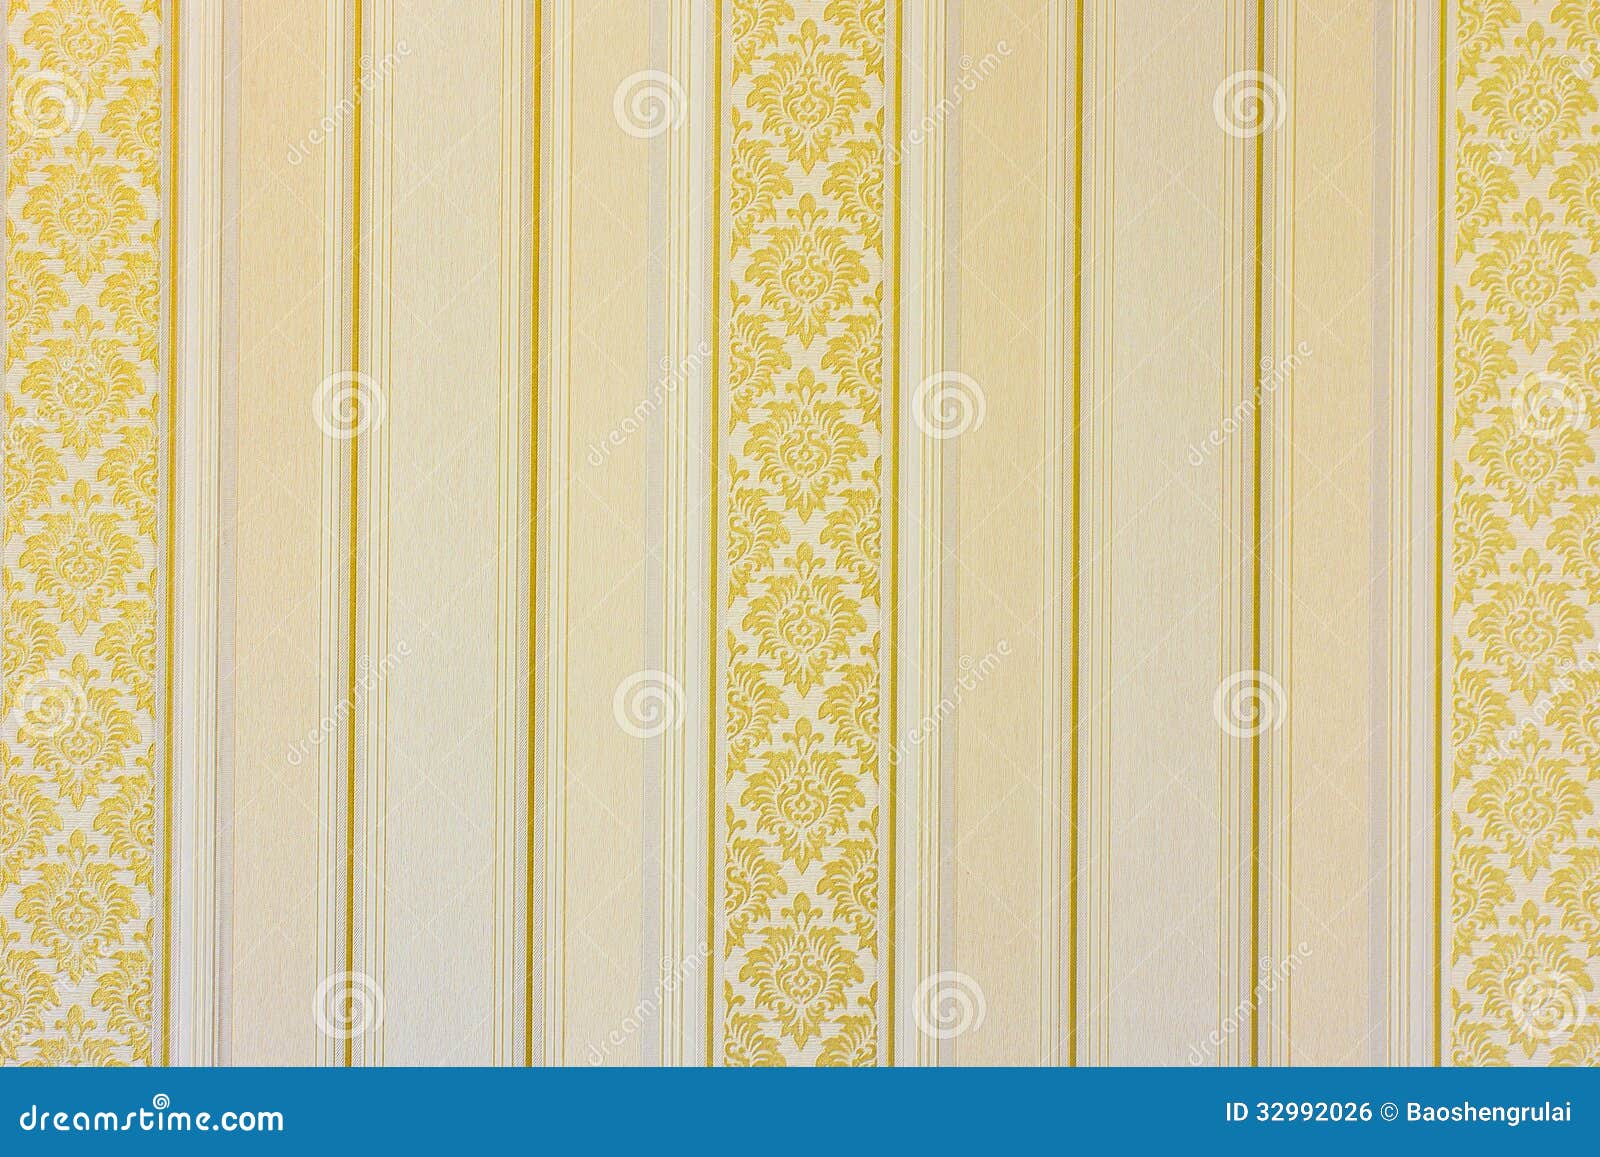 Gold Striped Wallpaper Royalty Free Stock Image - Image: 32992026